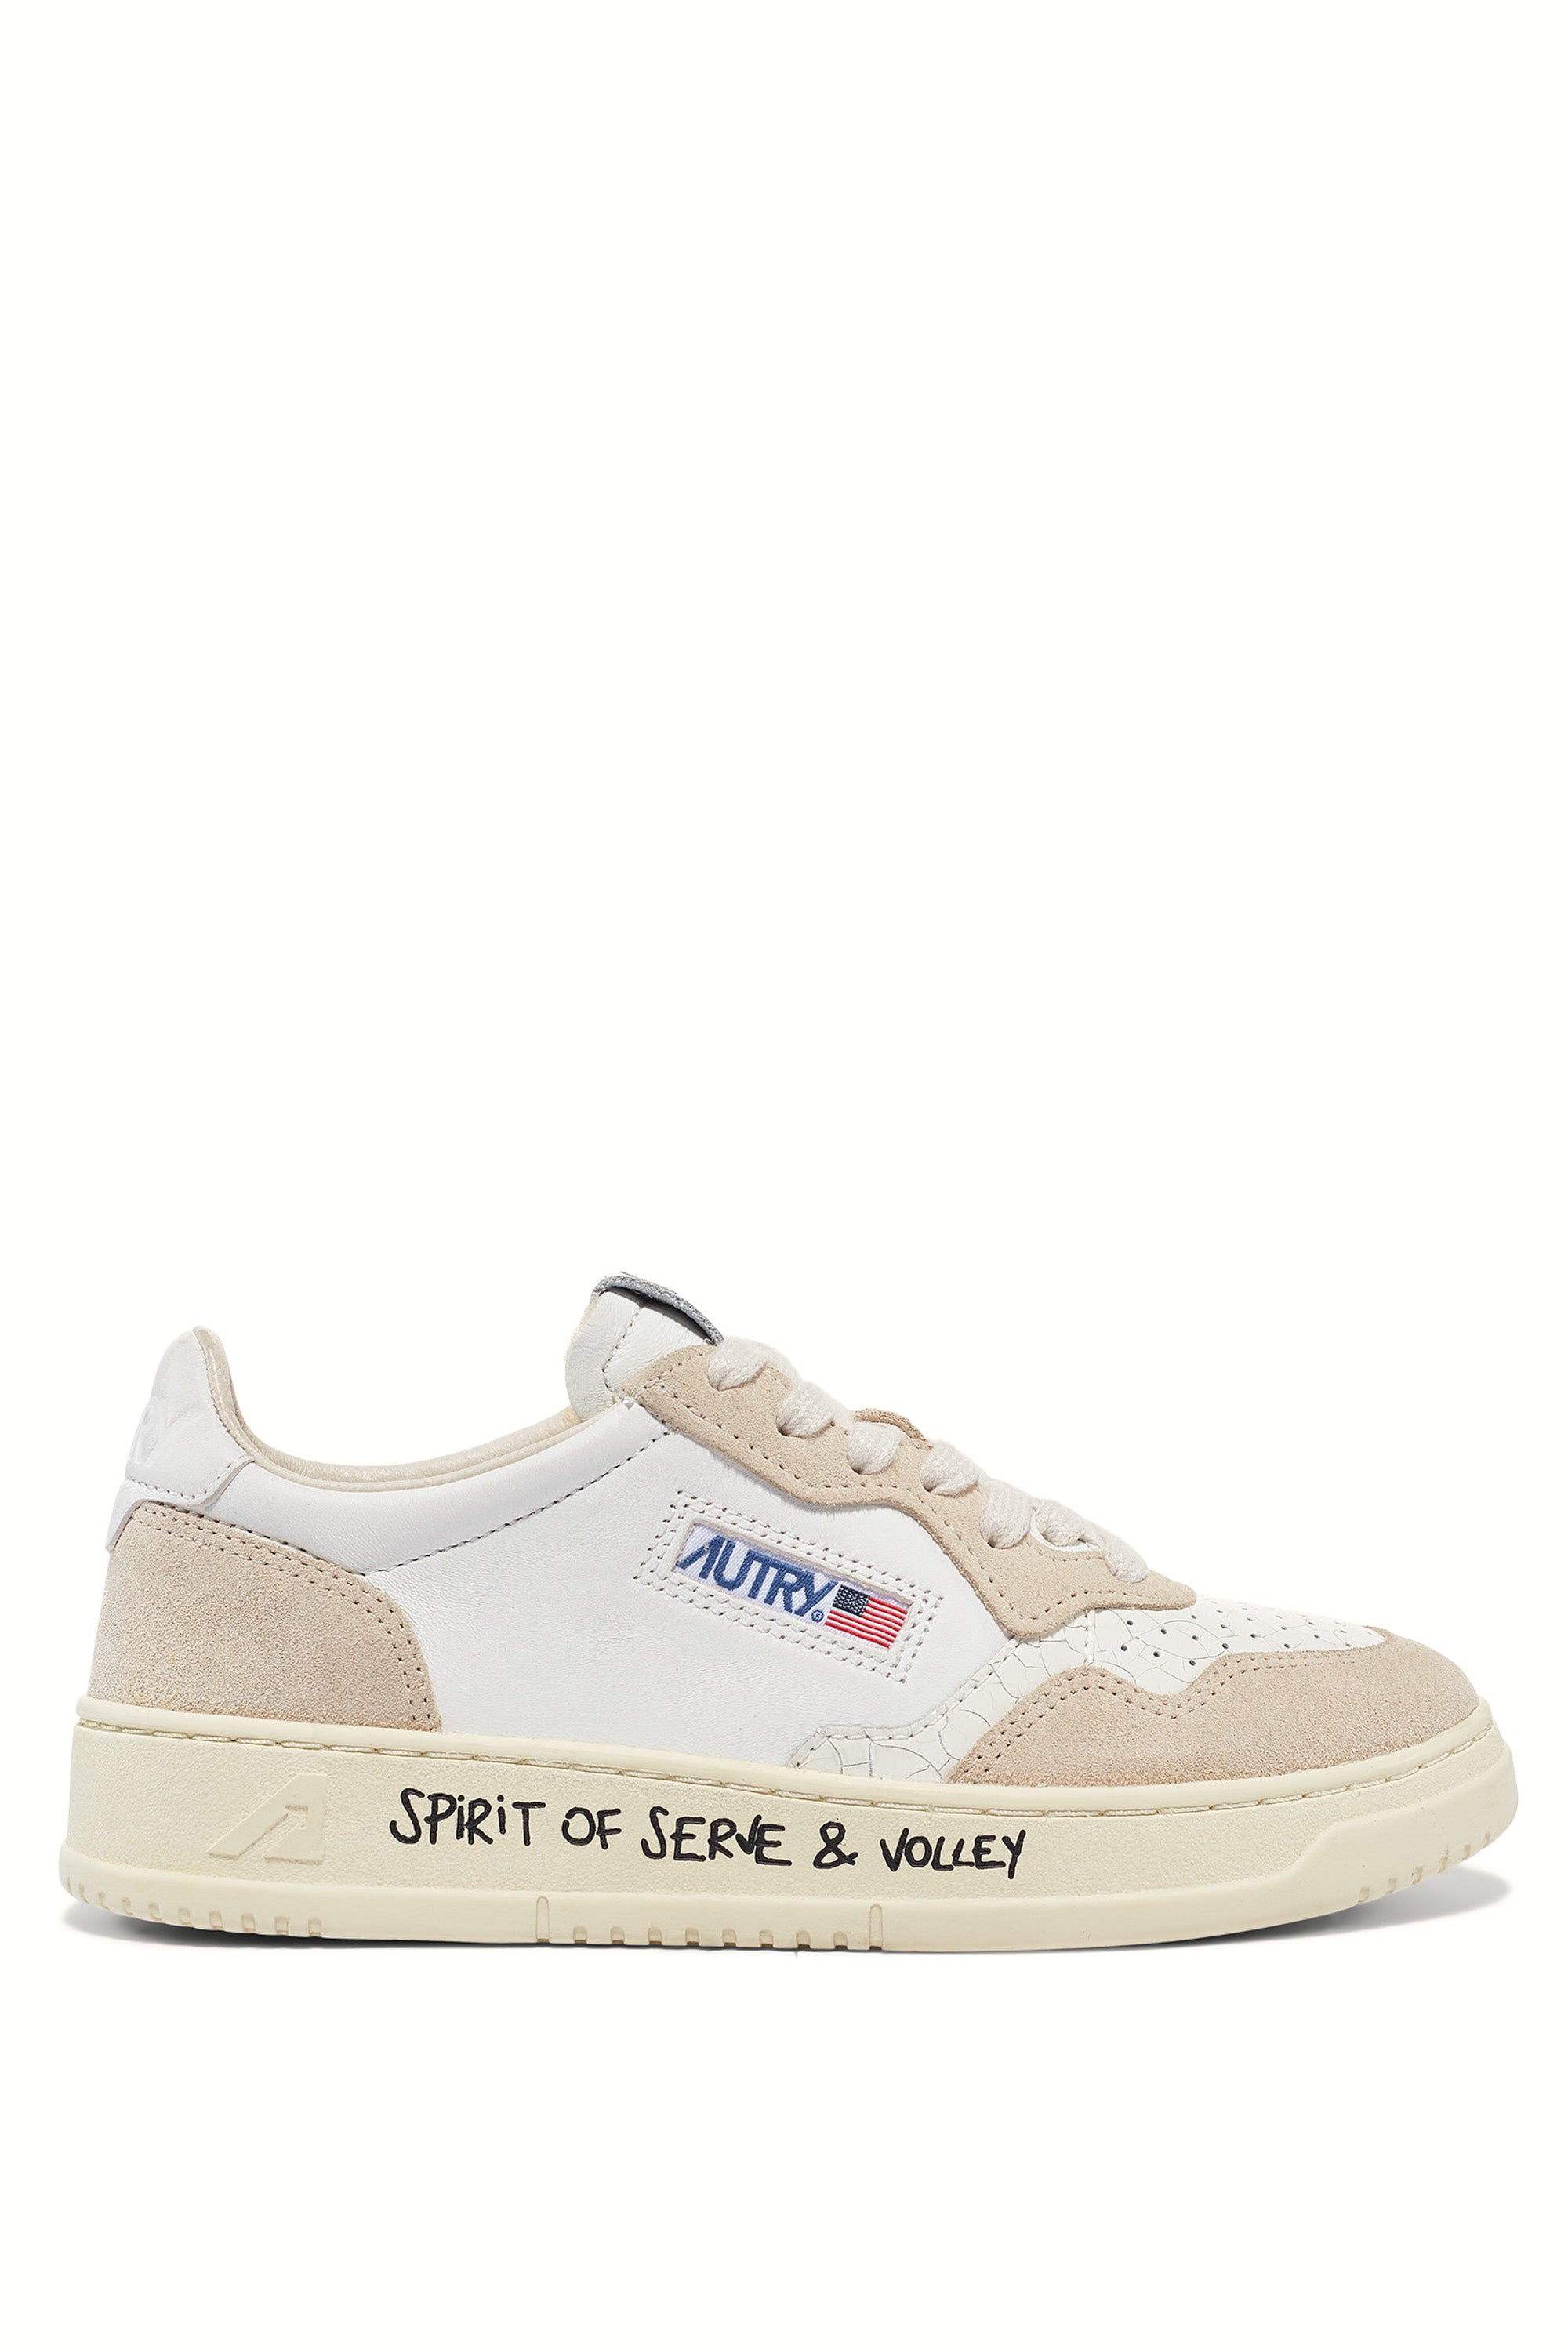 Medalist women's sneaker with white heel tab and writing